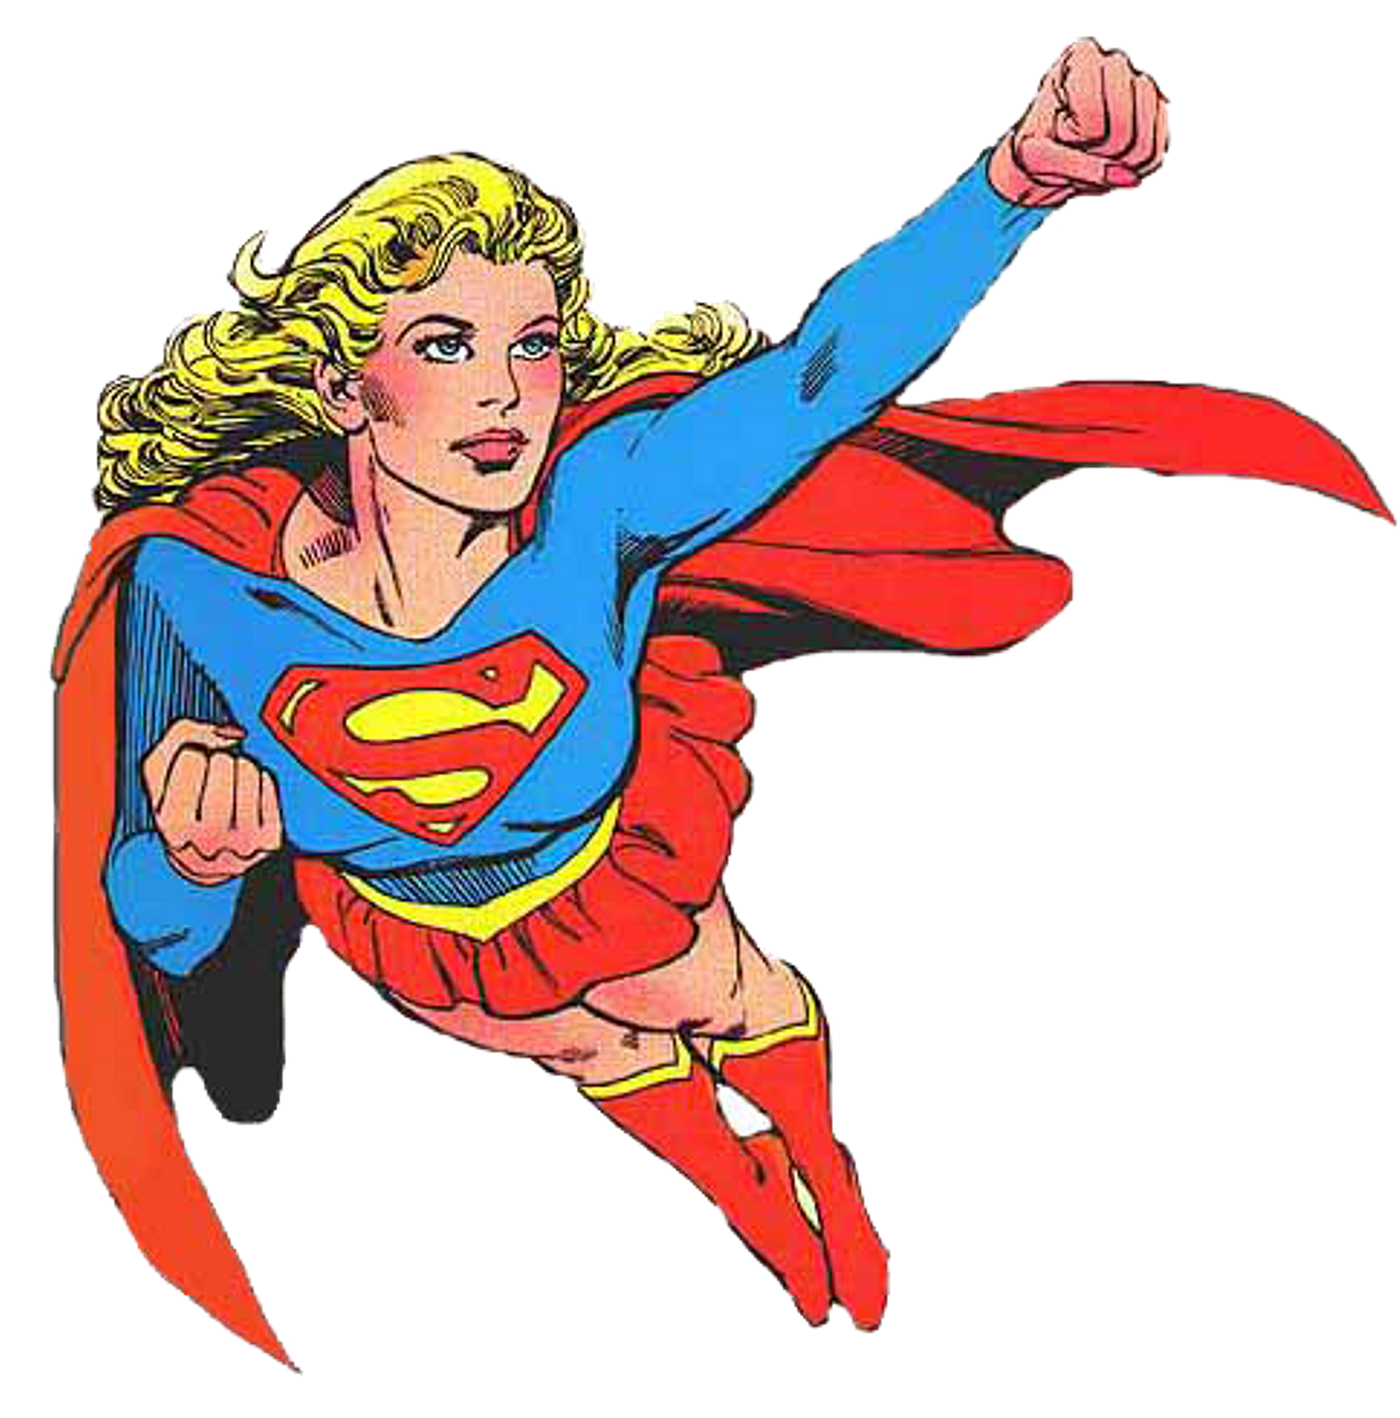 The “Superwoman” burden. We can all agree that the way women…